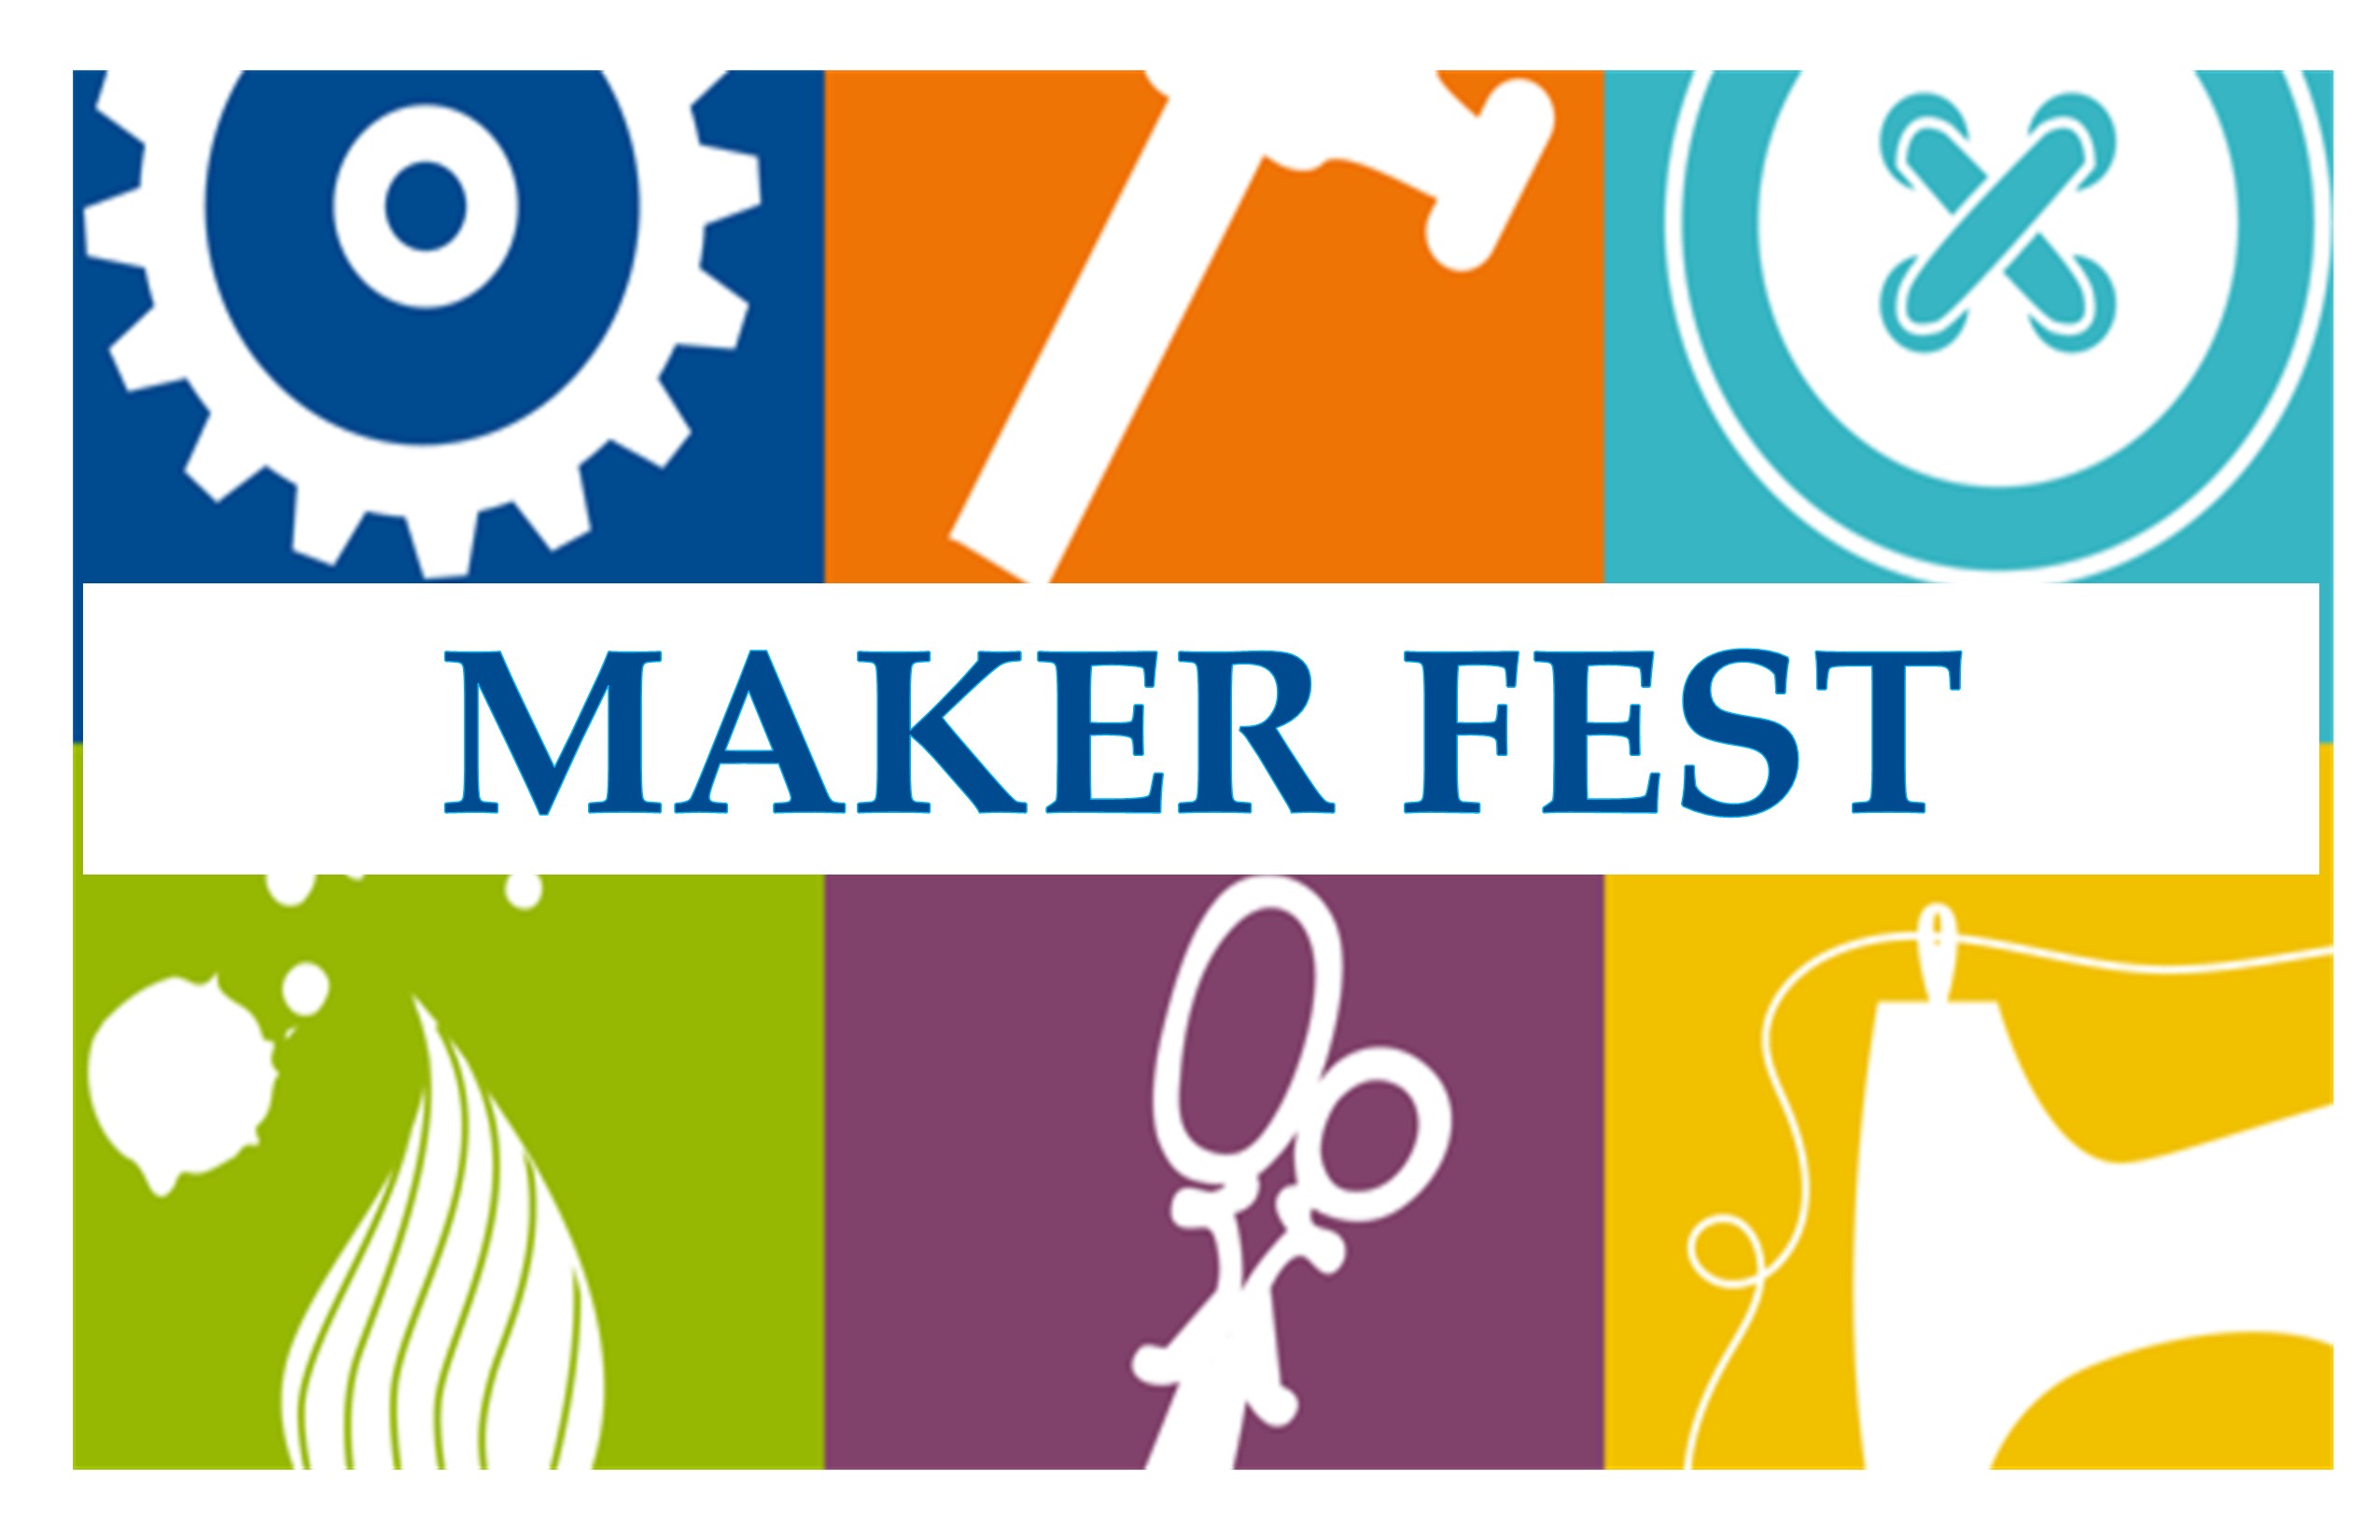 The word Maker Fest with 6 brightly colored boxes with a white symbol in each box